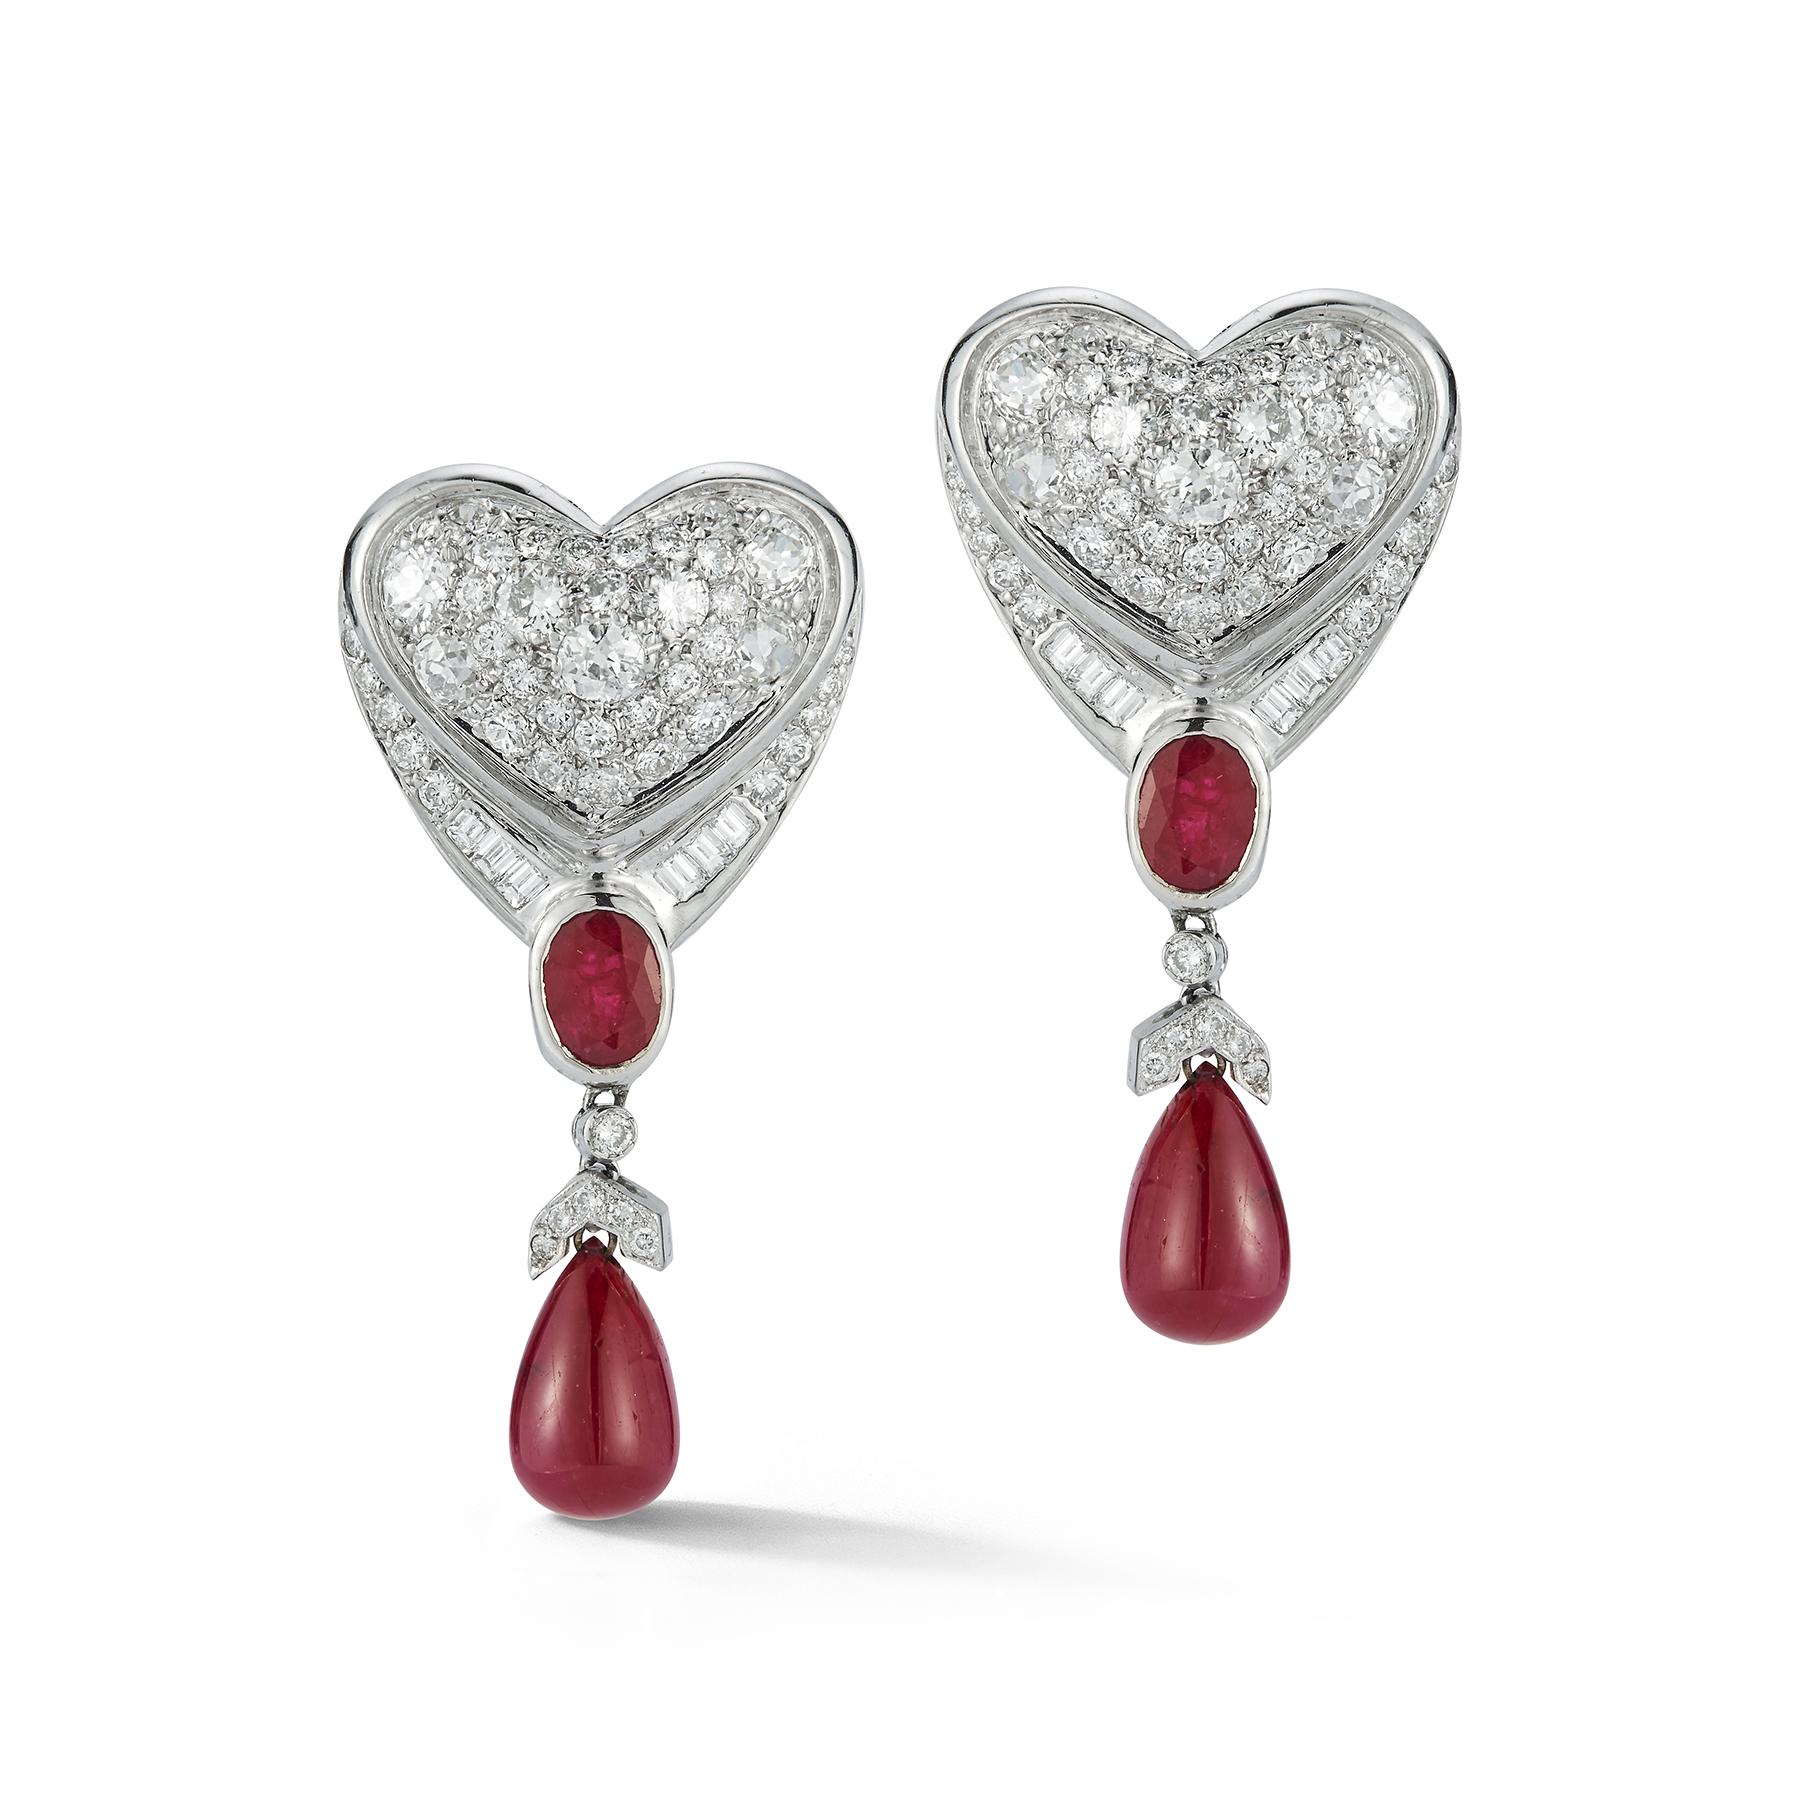 Ruby & Diamond Heart Drop Earrings, set with old mine diamonds. Circa 1990
Gold Type: 14K White Gold 
Back Type: clip on with post
Measurements: 1.75” long

